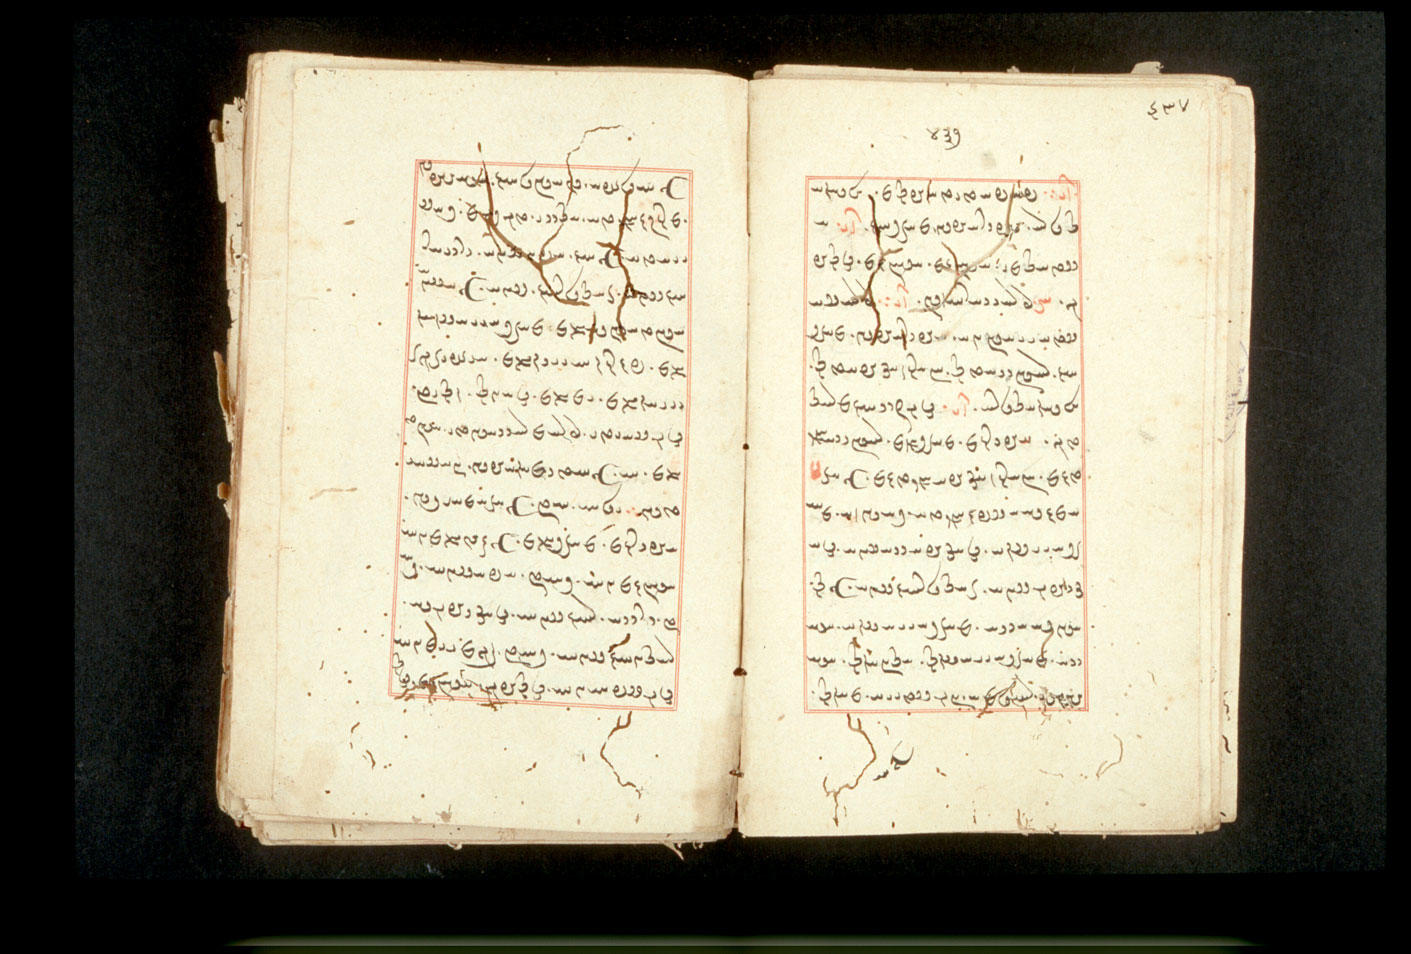 Folios 437v (right) and 438r (left)